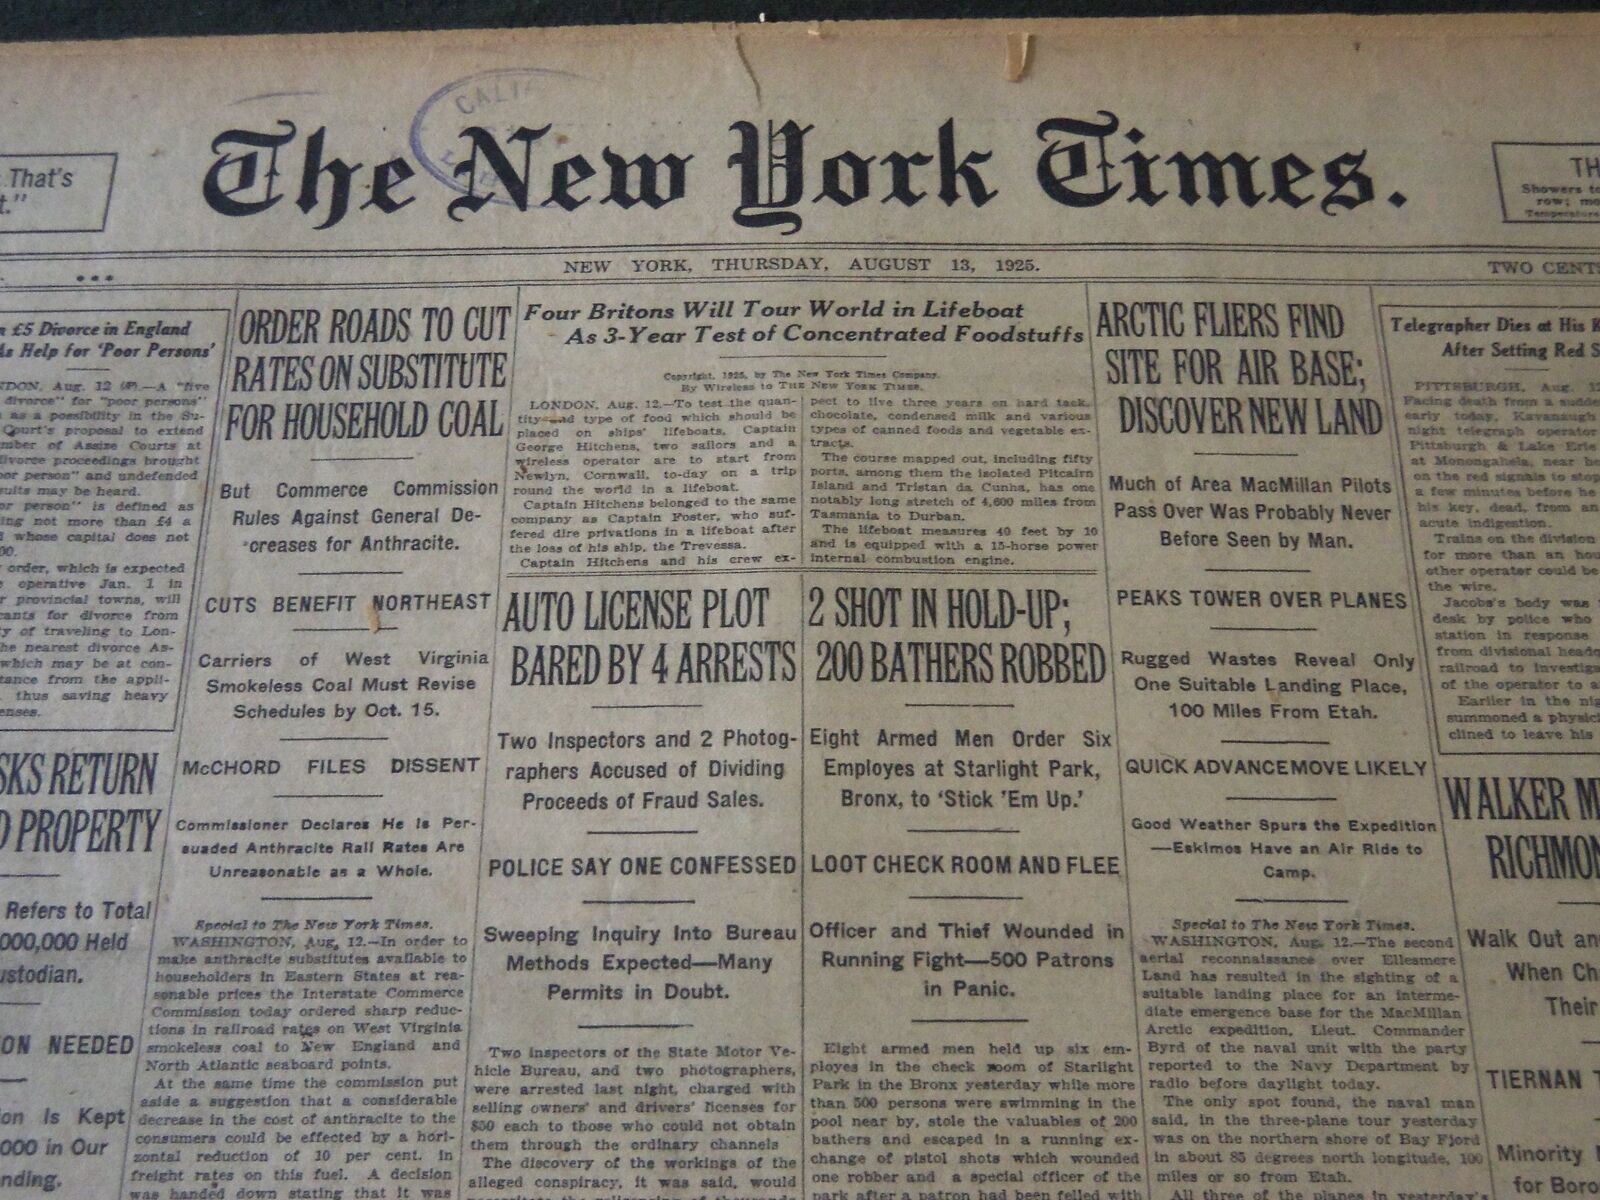 1925 AUGUST 13 NEW YORK TIMES - ARCTIC FLIERS FIND SITE FOR AIR BASE - NT 5431